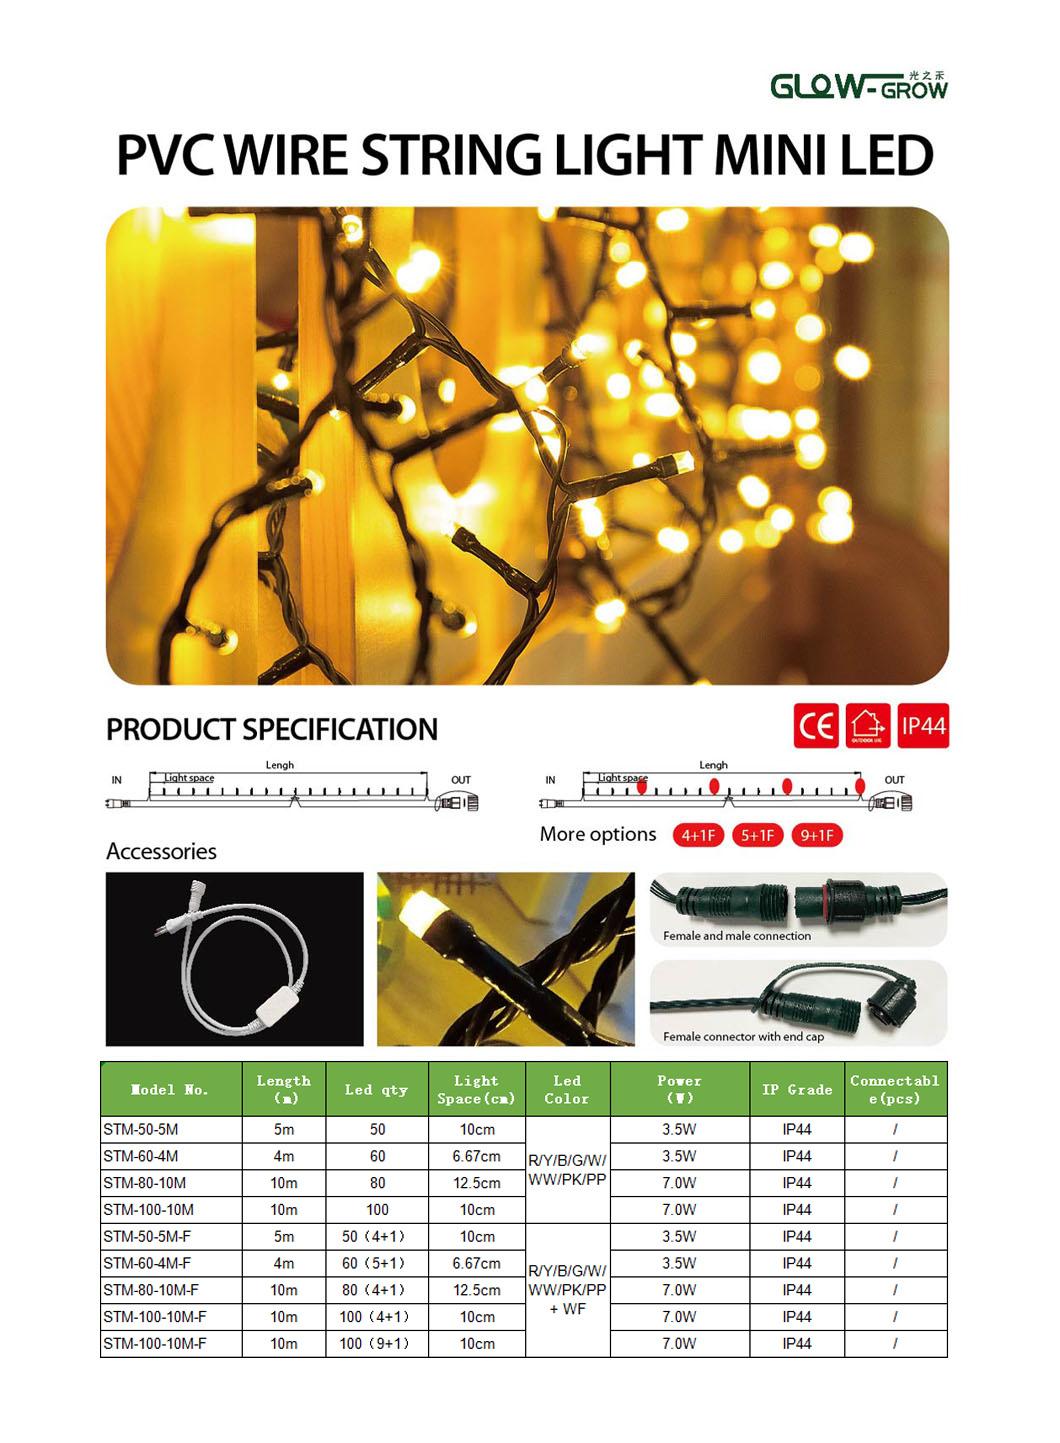 Multicolor Solar Powered LED String Light Christmas Fairy Light with IP44 Waterproof for Party Home Garden Decoration